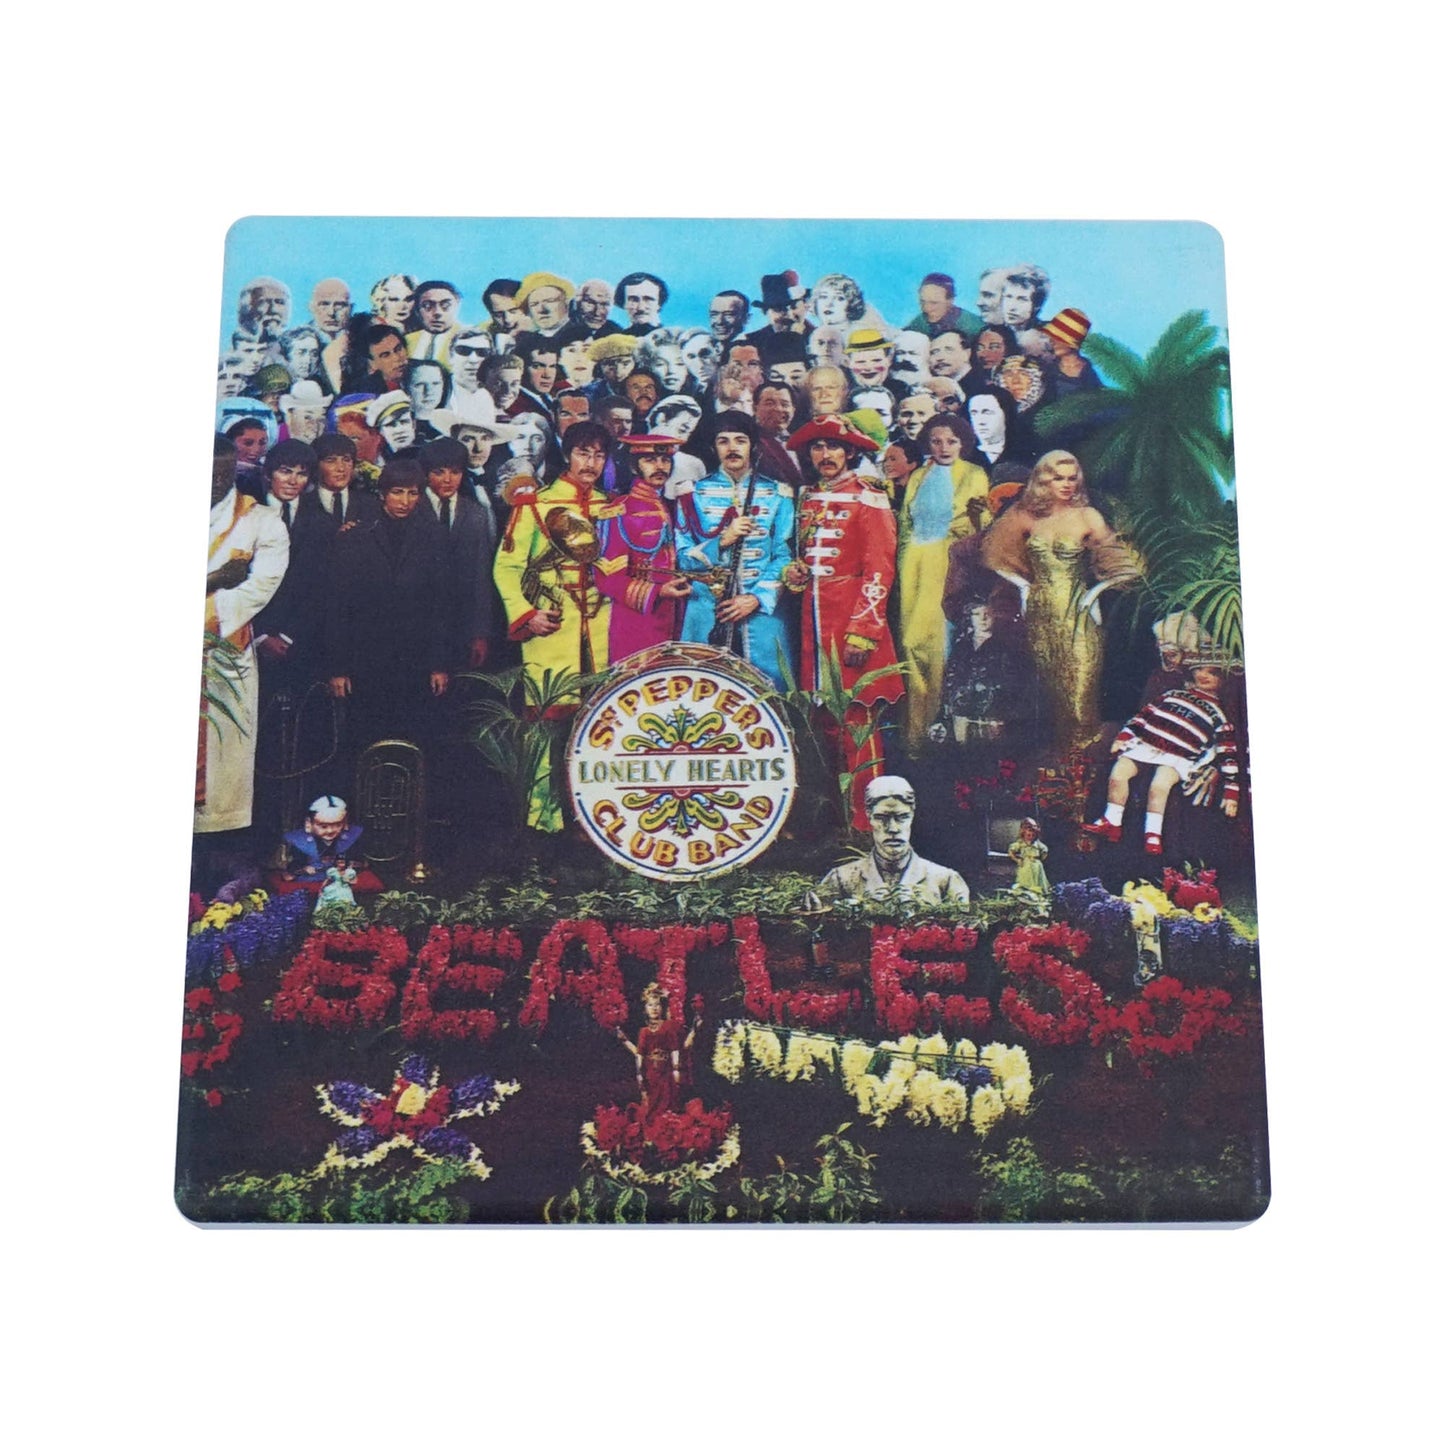 Coaster The Beatles Sgt Pepper's Lonely Hearts Club Band